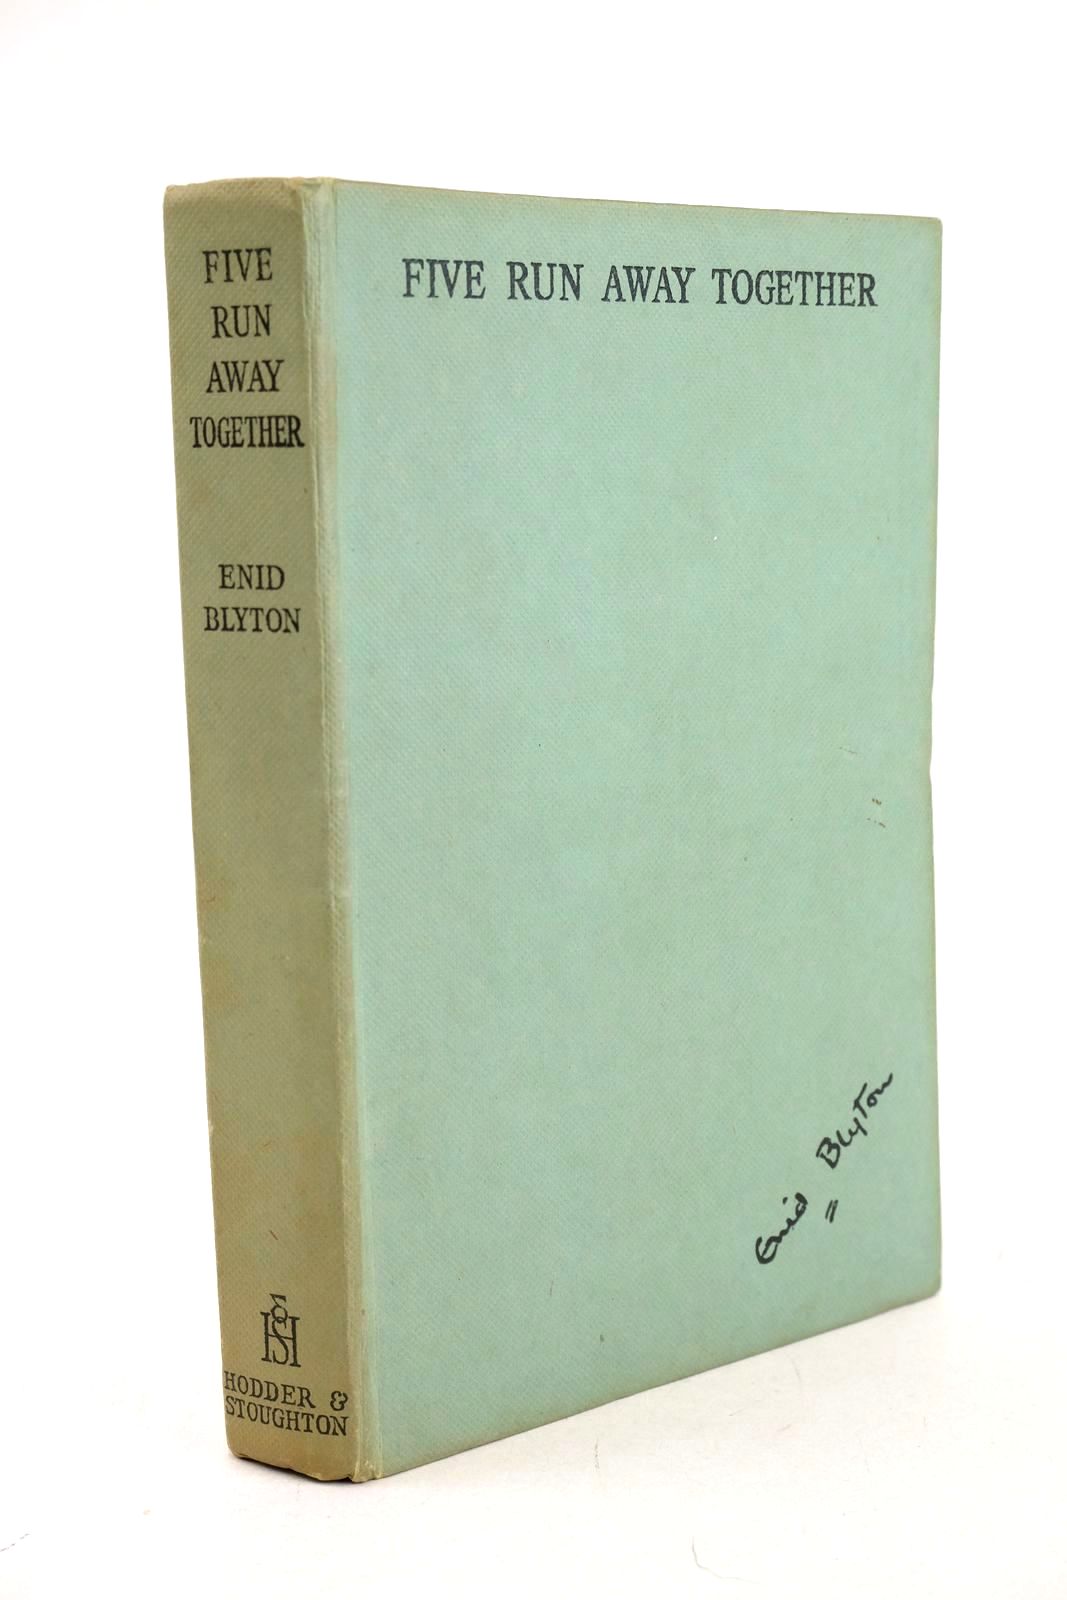 Photo of FIVE RUN AWAY TOGETHER- Stock Number: 1326750